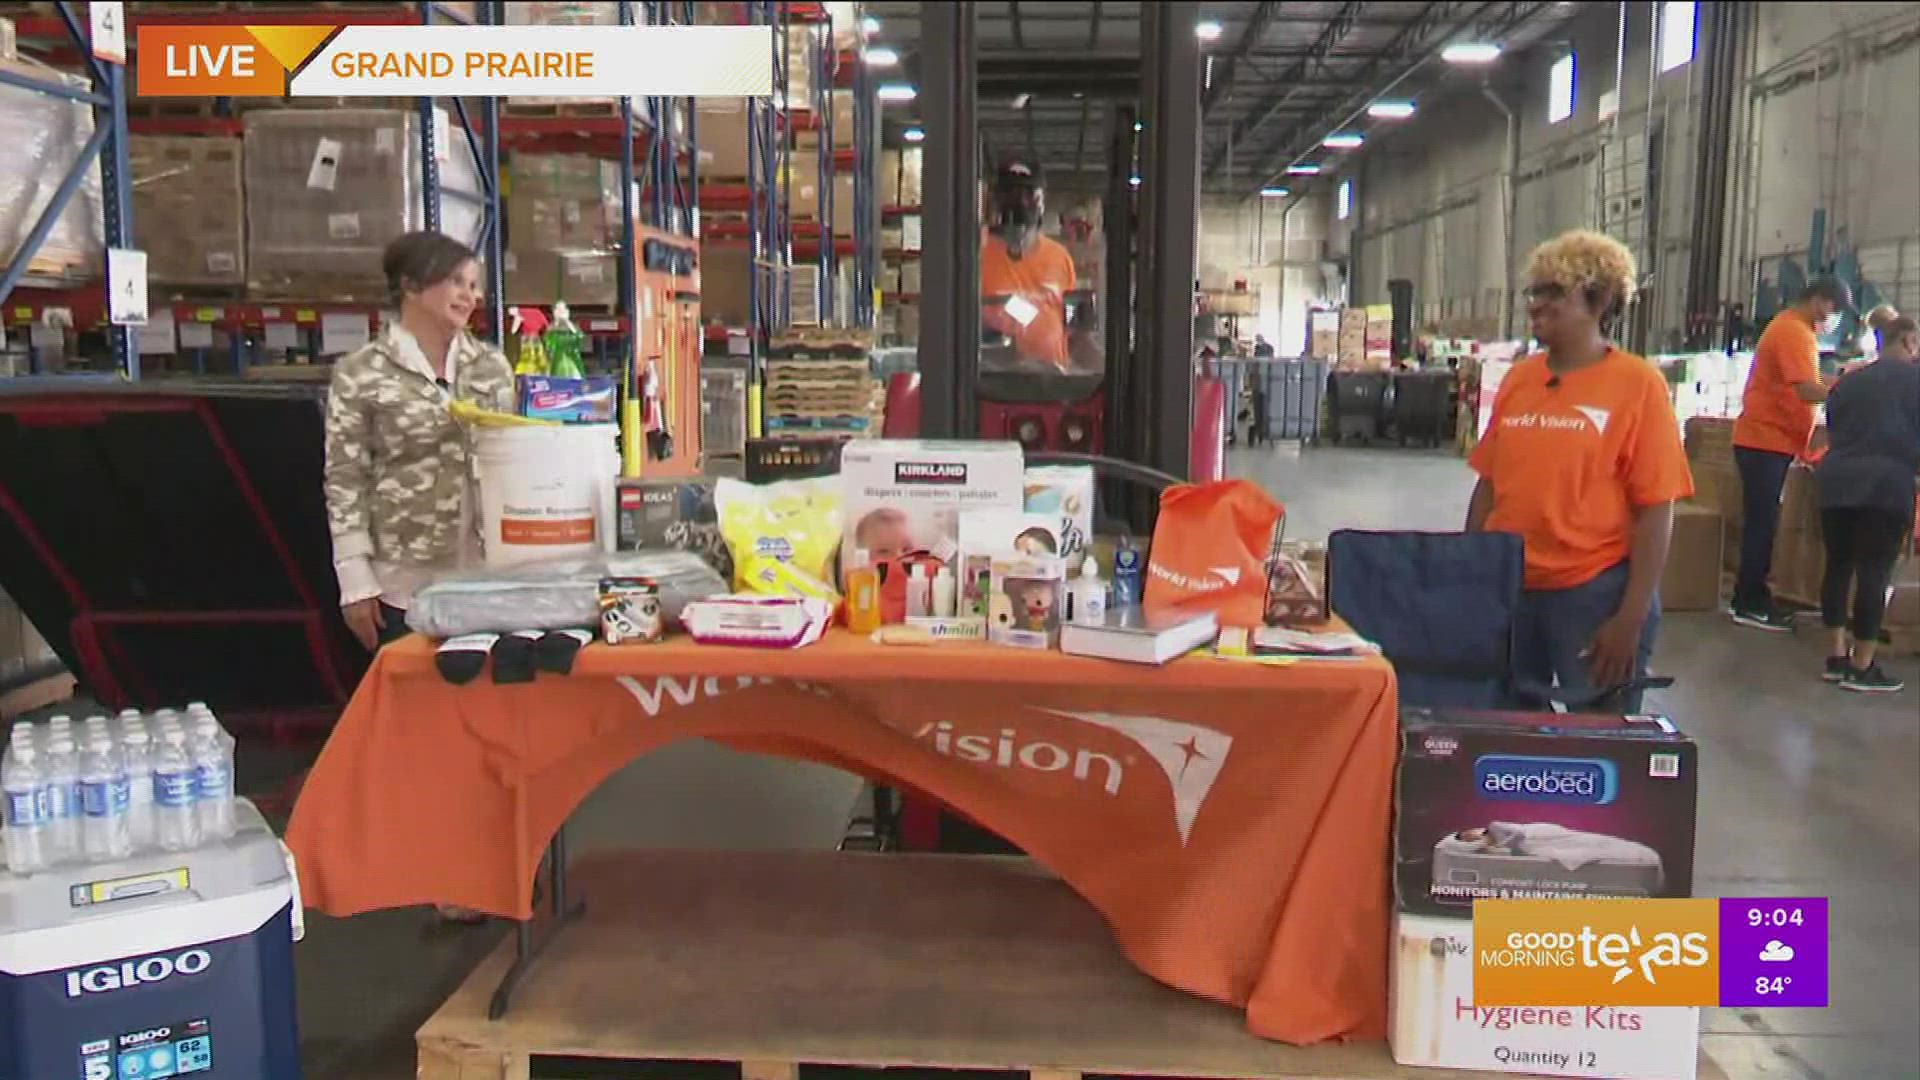 Paige reports live from the World Vision warehouse in Grand Prairie